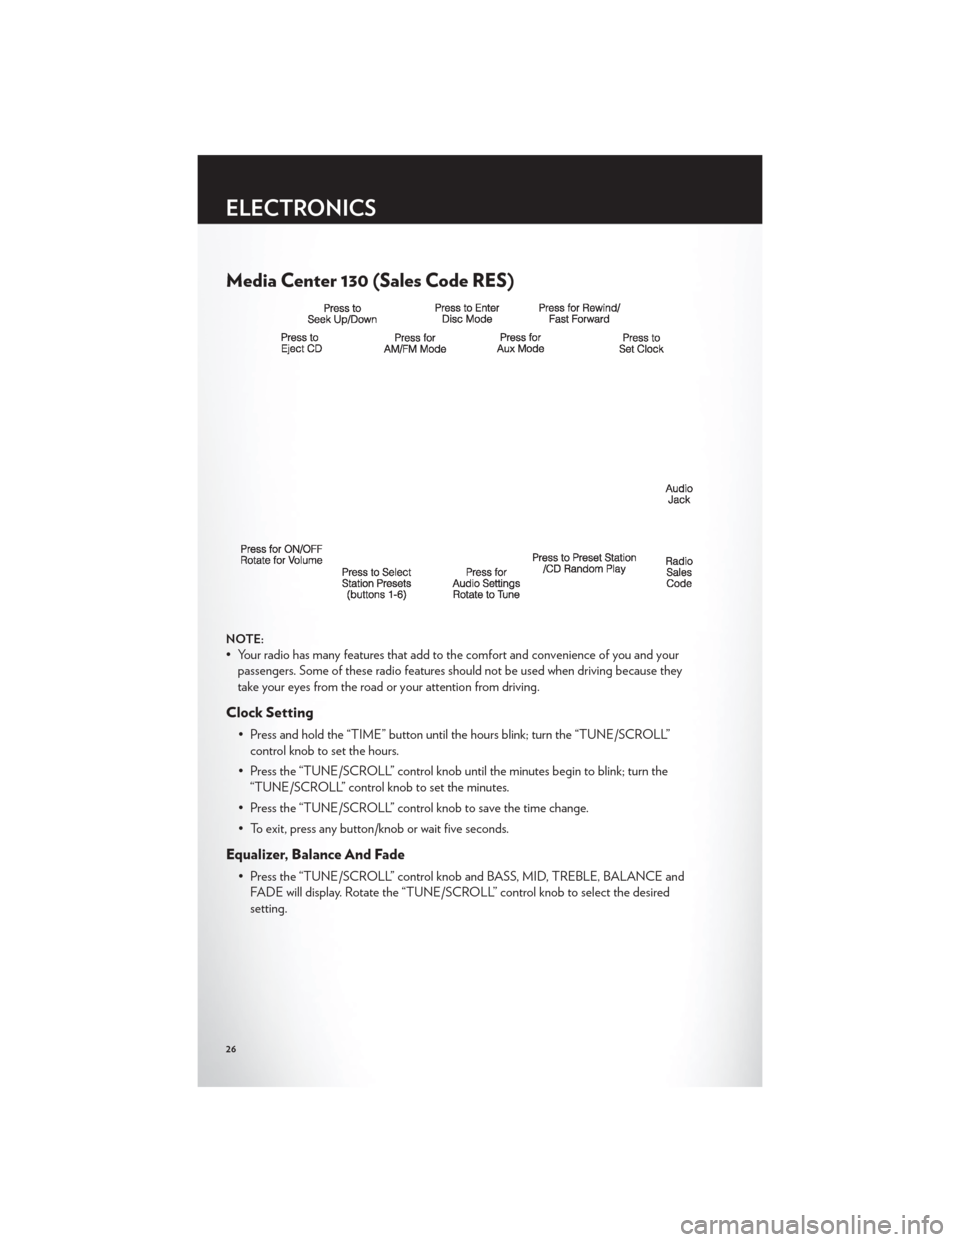 CHRYSLER 200 2012 1.G User Guide Media Center 130 (Sales Code RES)
NOTE:
• Your radio has many features that add to the comfort and convenience of you and yourpassengers. Some of these radio features should not be used when driving